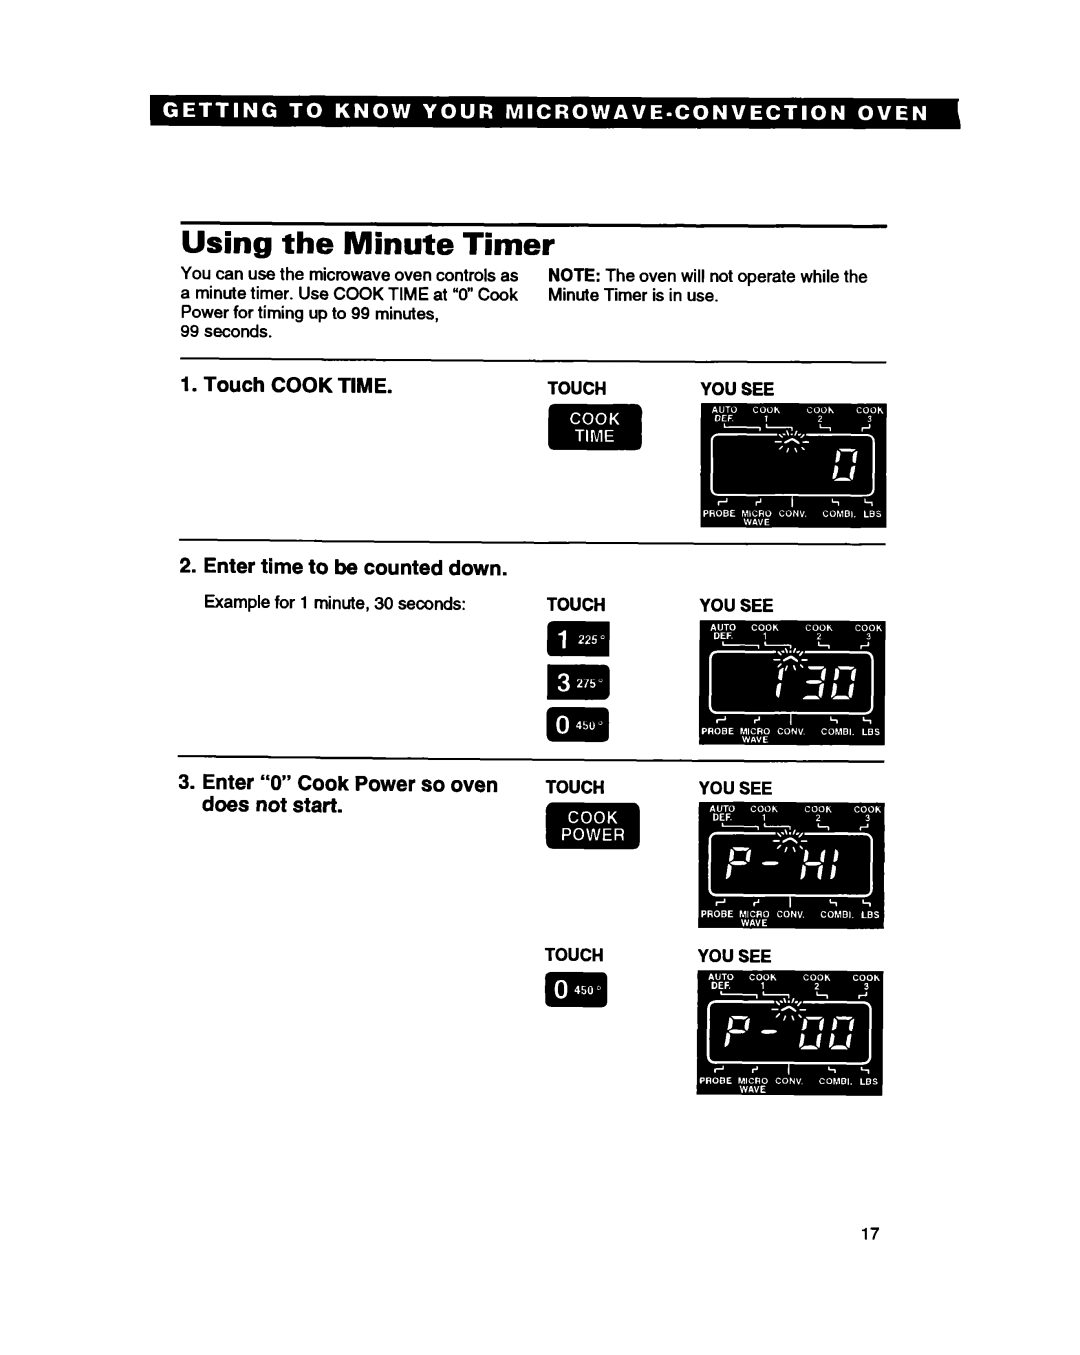 Whirlpool MC8130XA warranty Using the Minute Timer, Touch COOK TIME, Enter time to be counted down 